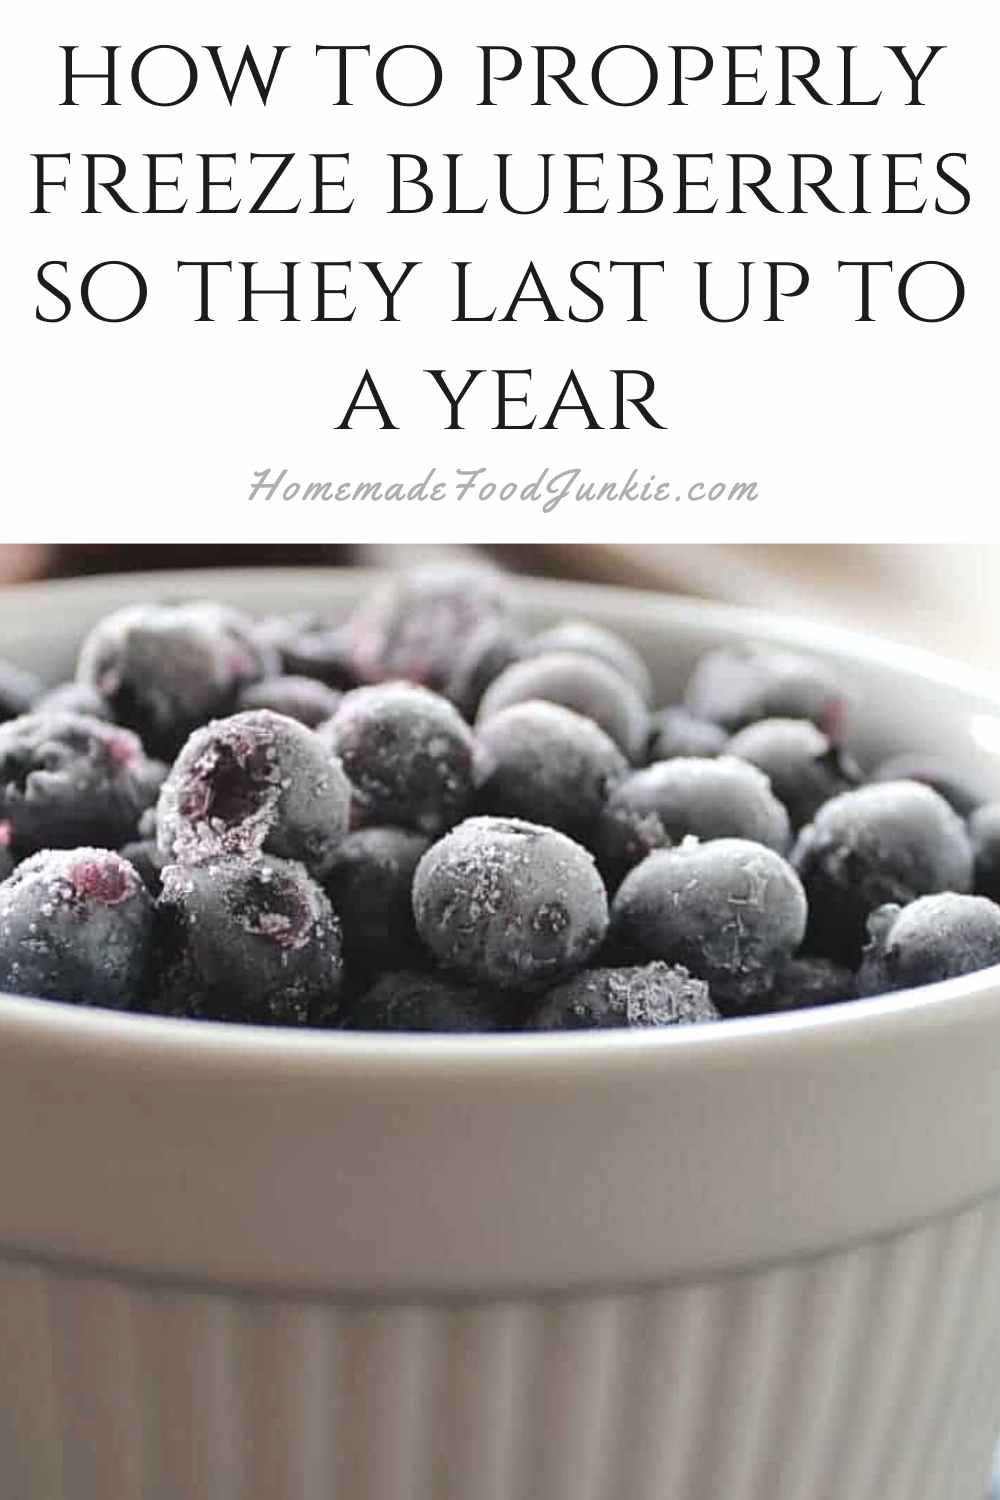 How To Properly Freeze Blueberries So They Last Up To A Year-Pin Image